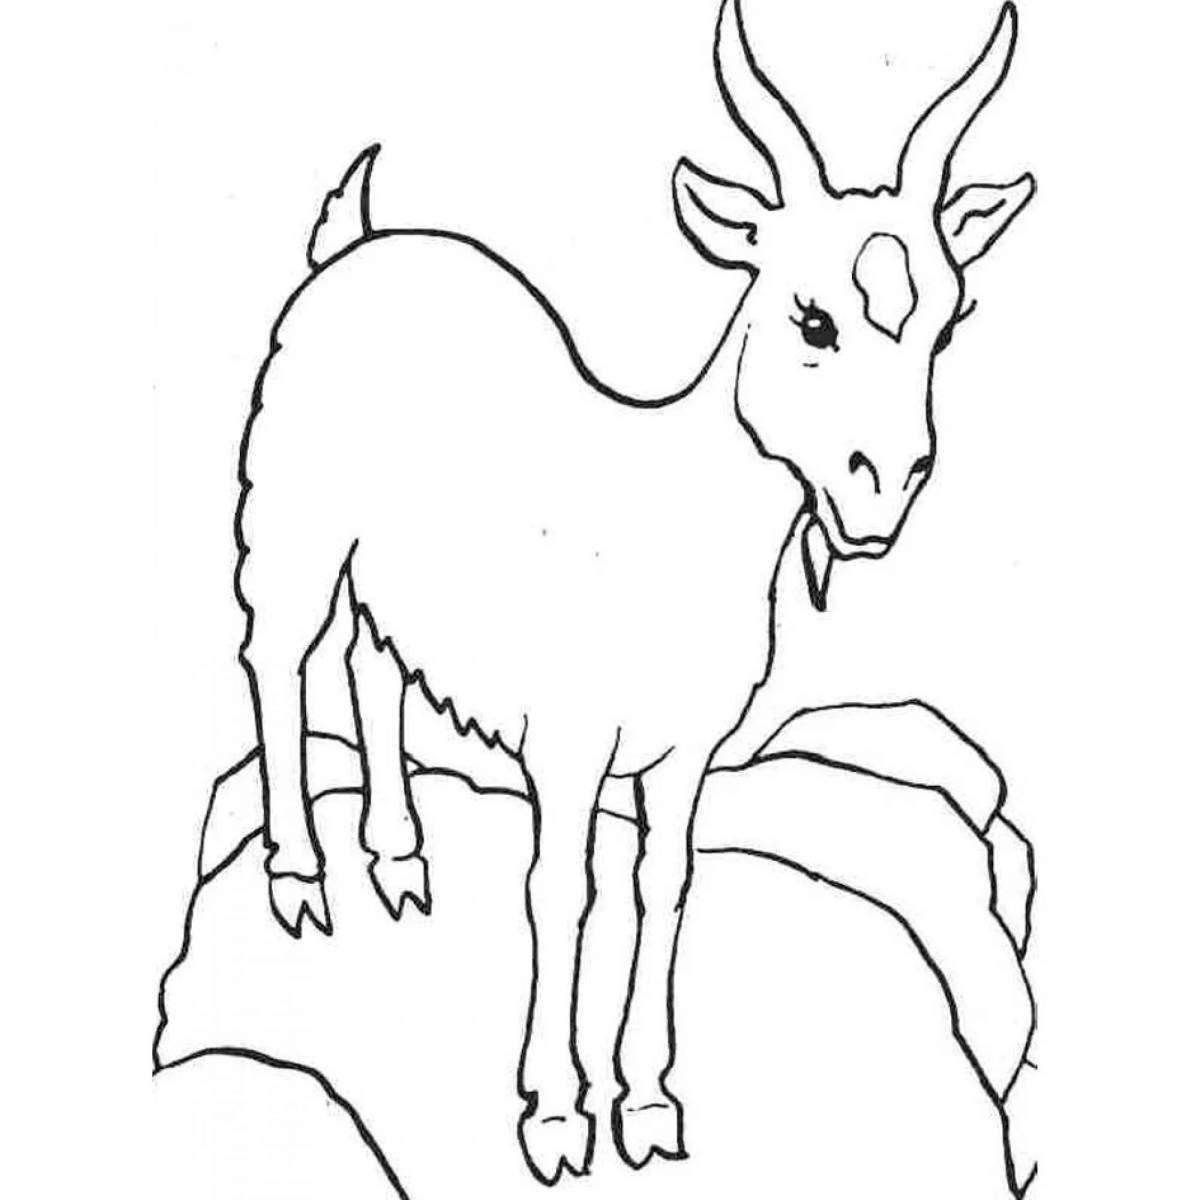 Fancy goat coloring for kids